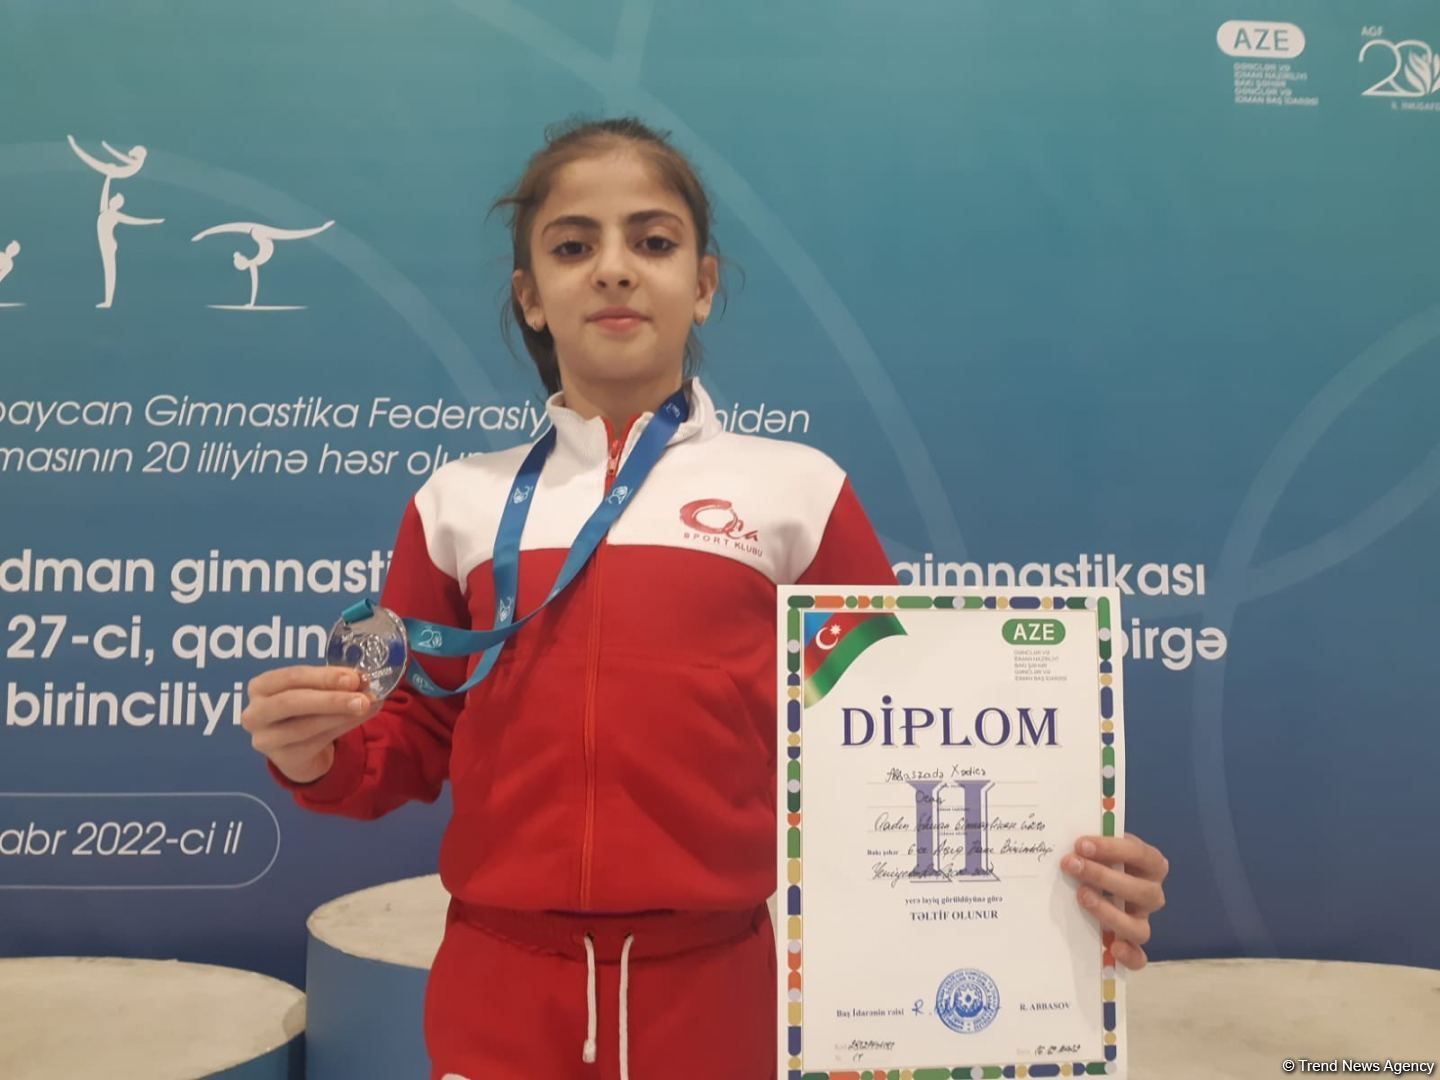 Young Azerbaijani gymnast plans to improve her performance in next competitions